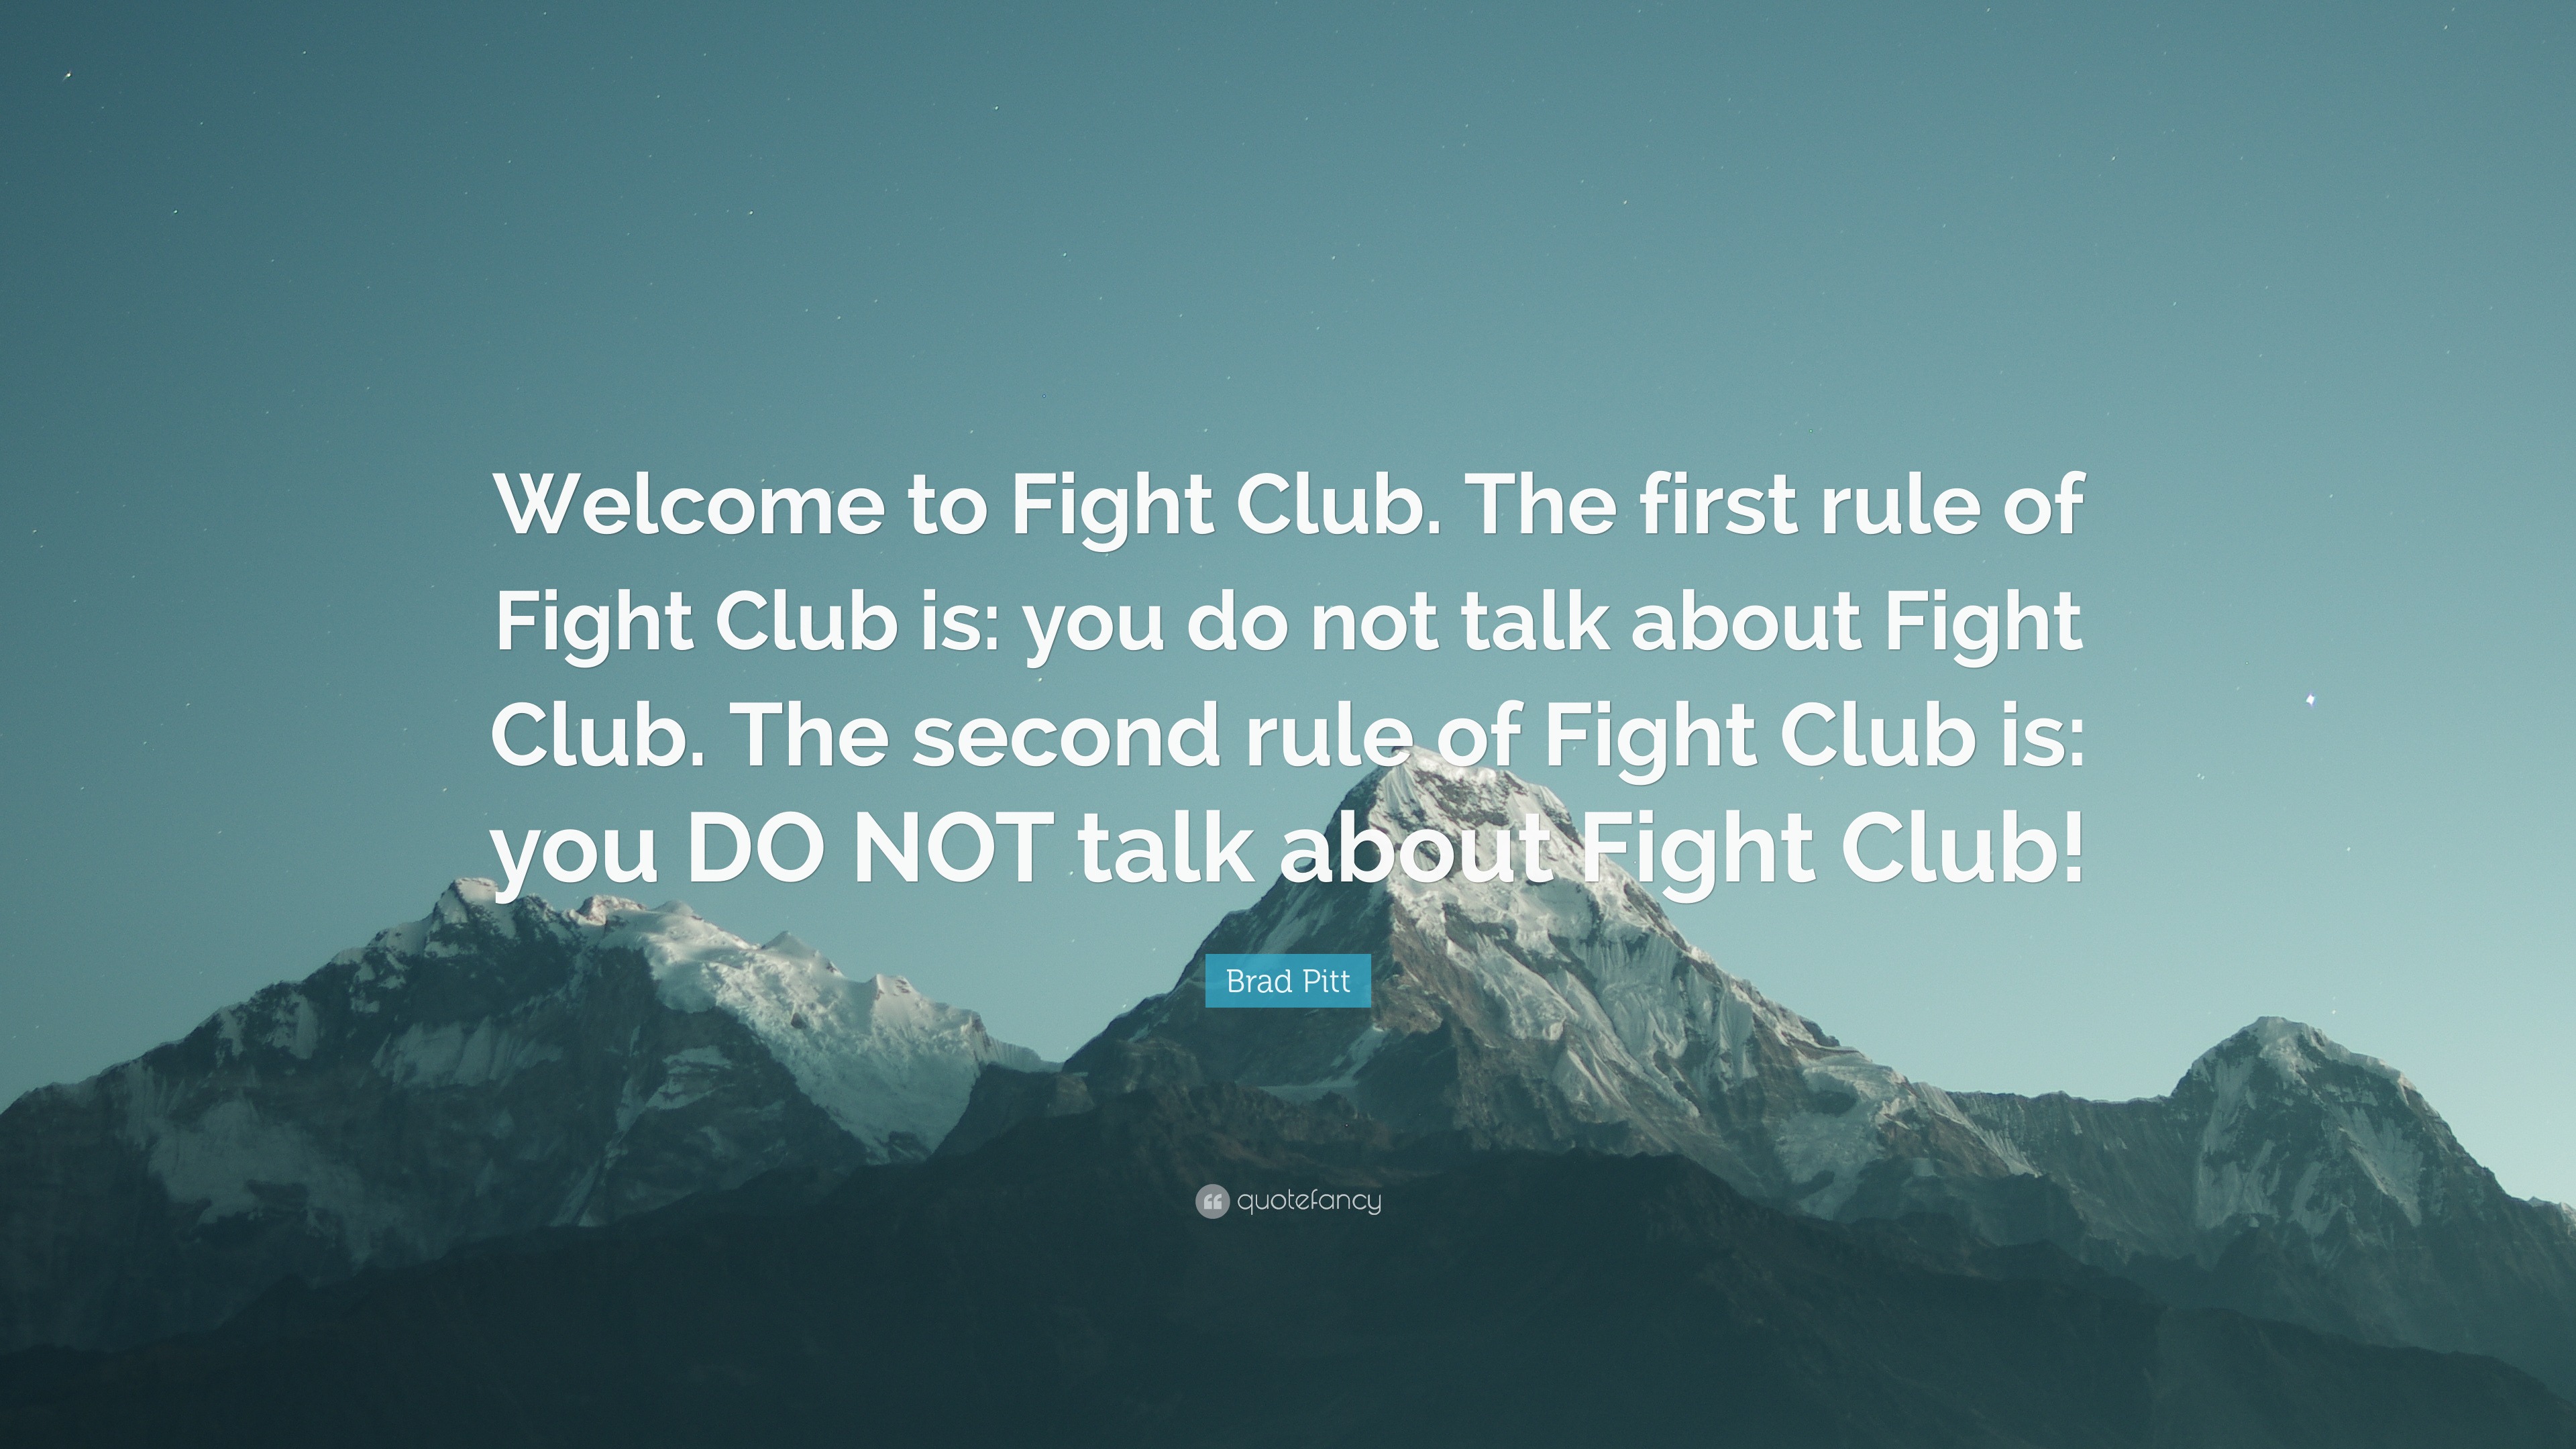 Brad Pitt Quote: “Welcome to Fight Club. The first rule of Fight Club ...